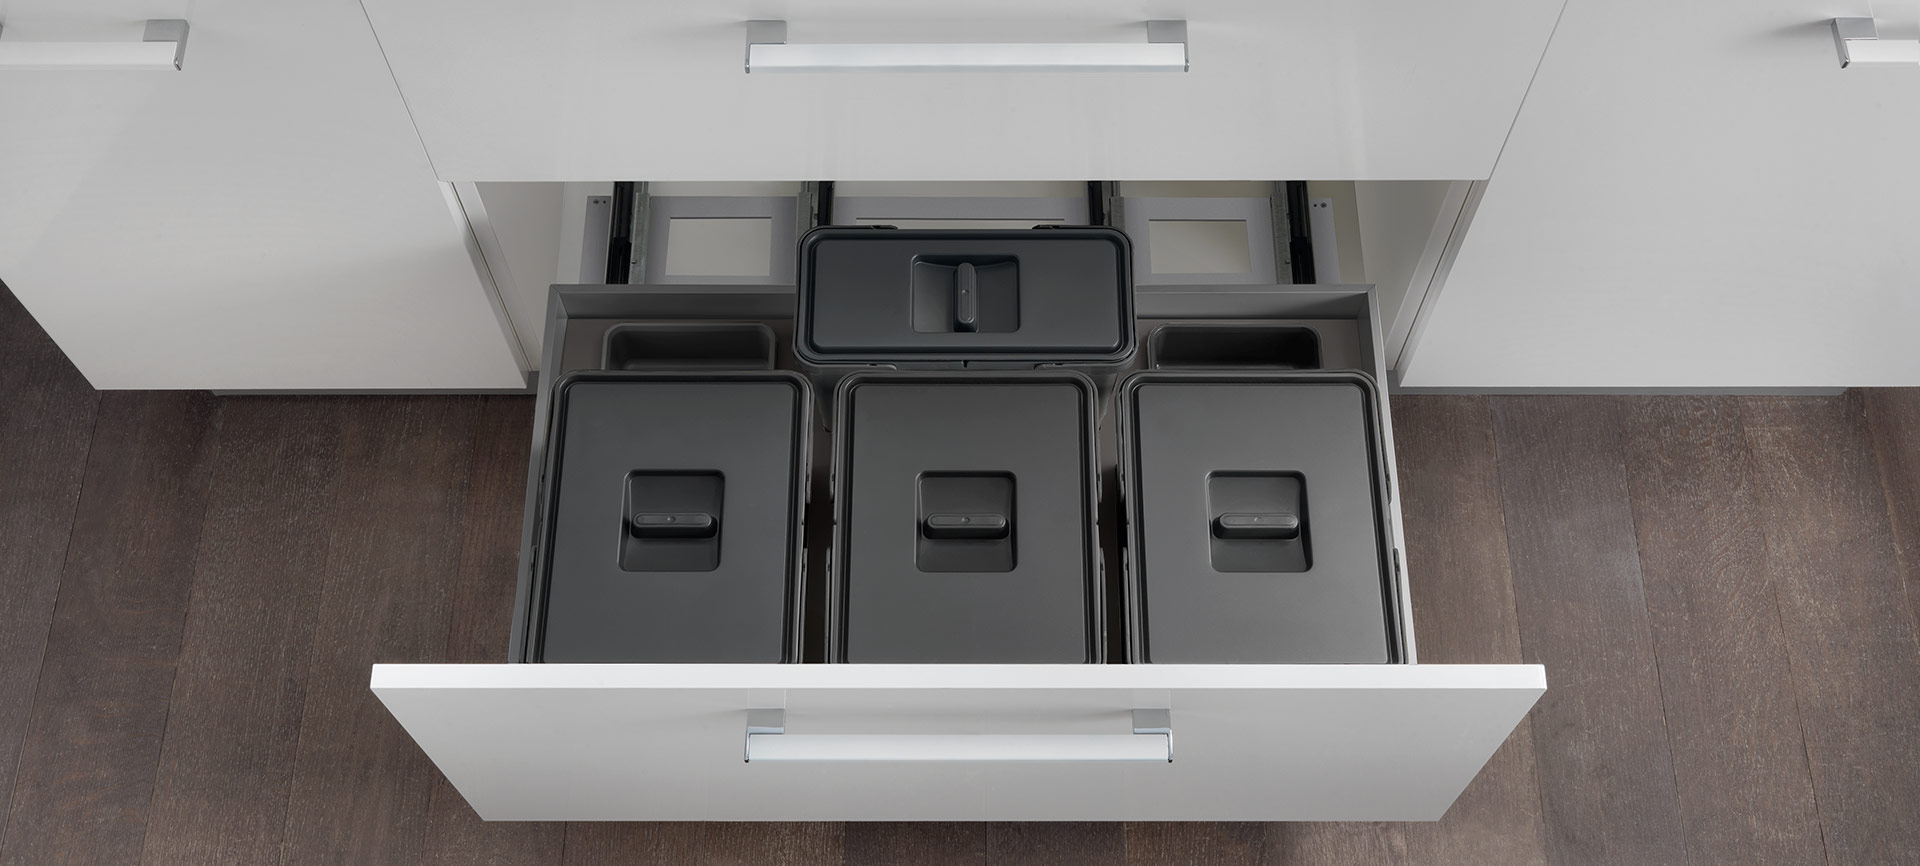 Organization and functionality: waste bin systems and pull-out units